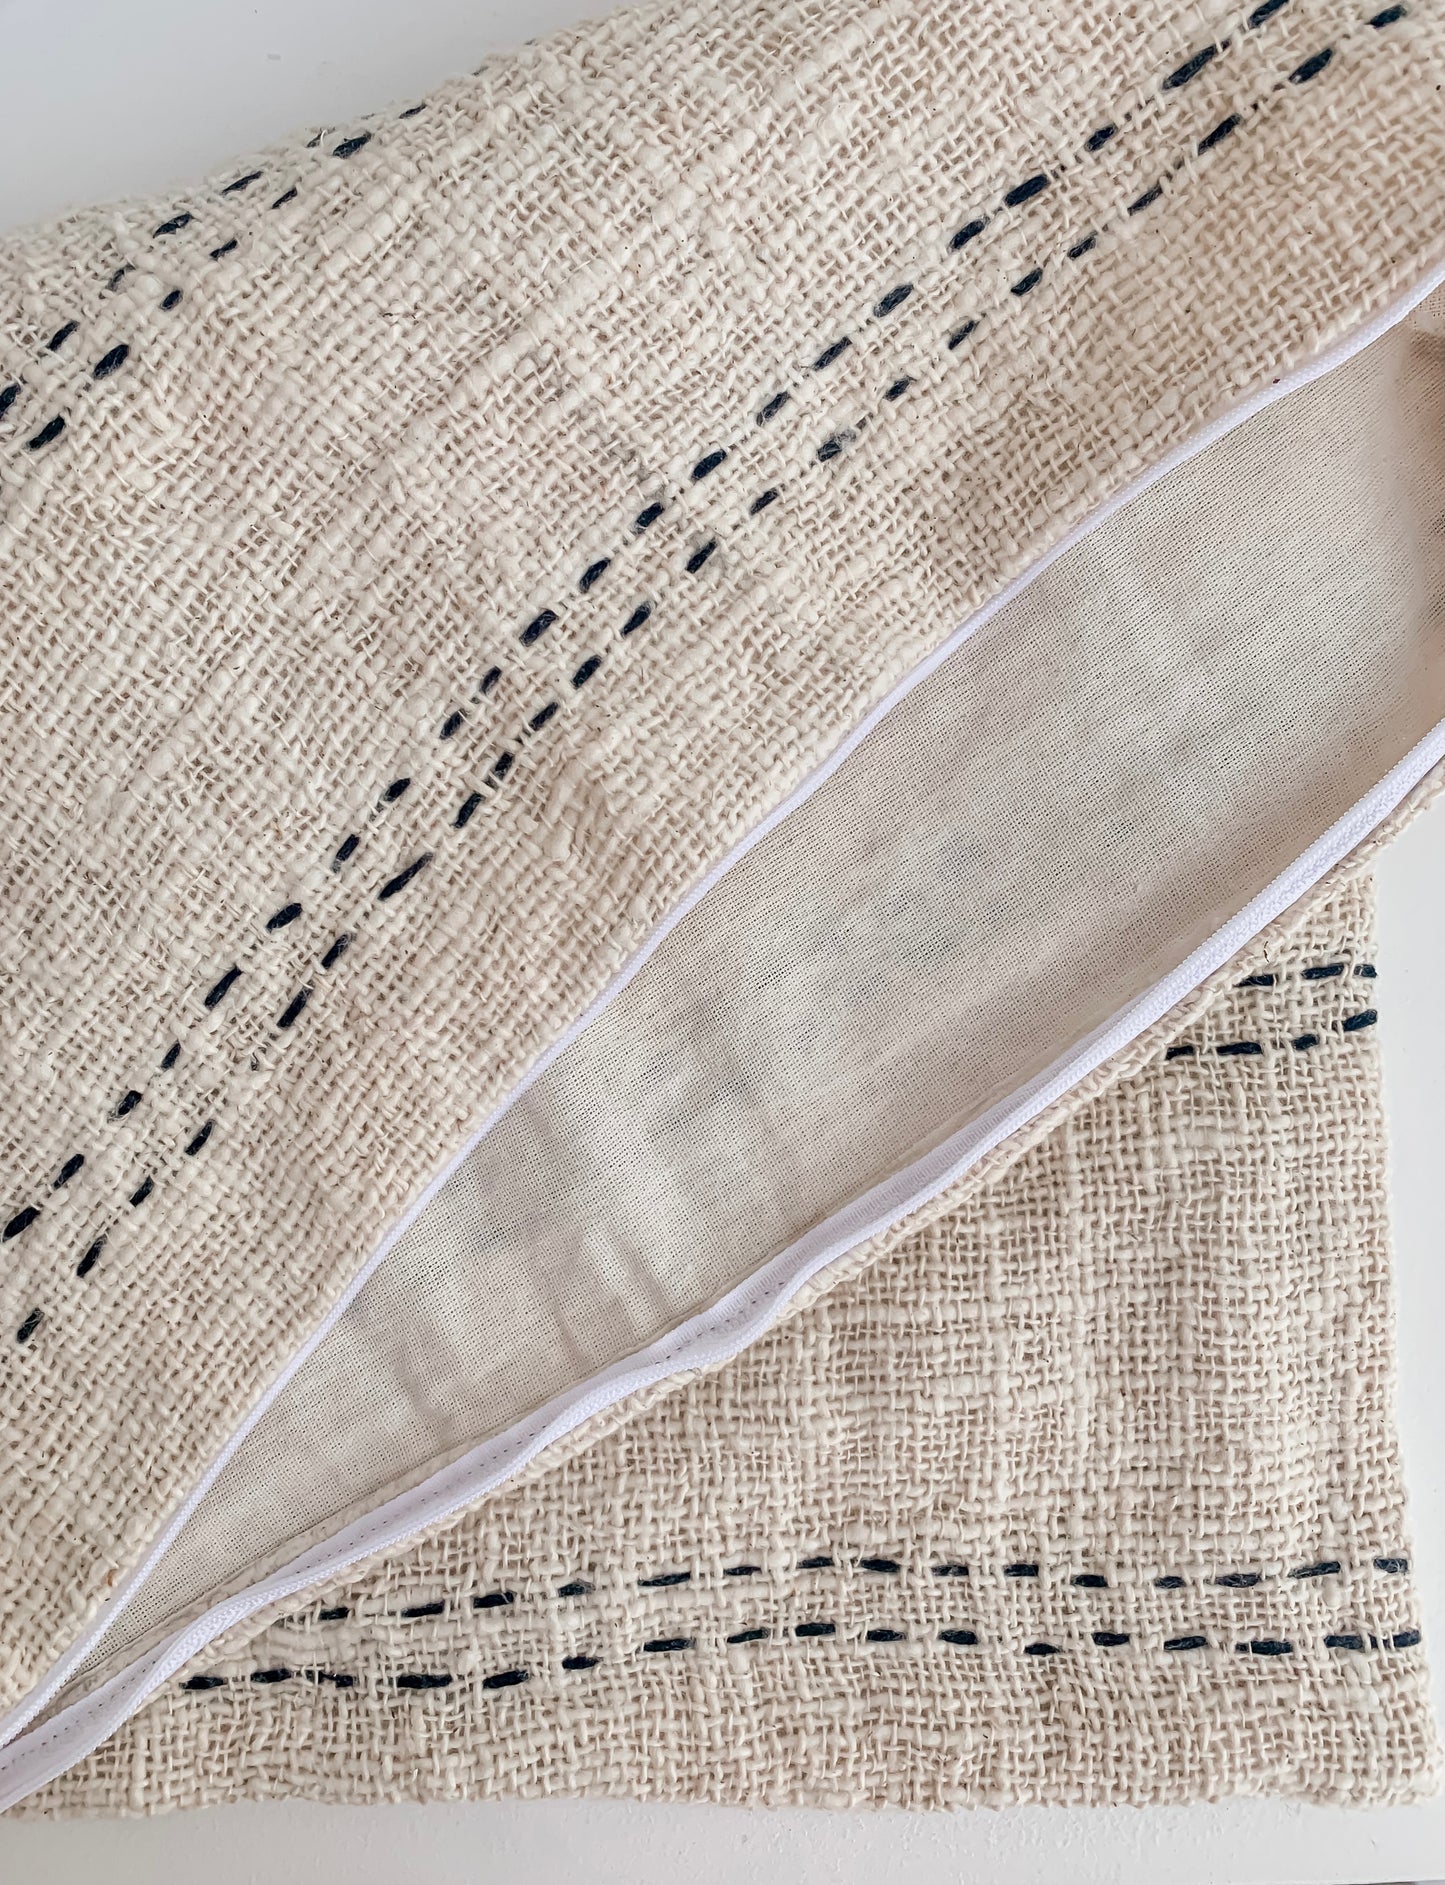 A Nyah | Stitch Cushion cover in a natural color with simple stitching by Barre Living.